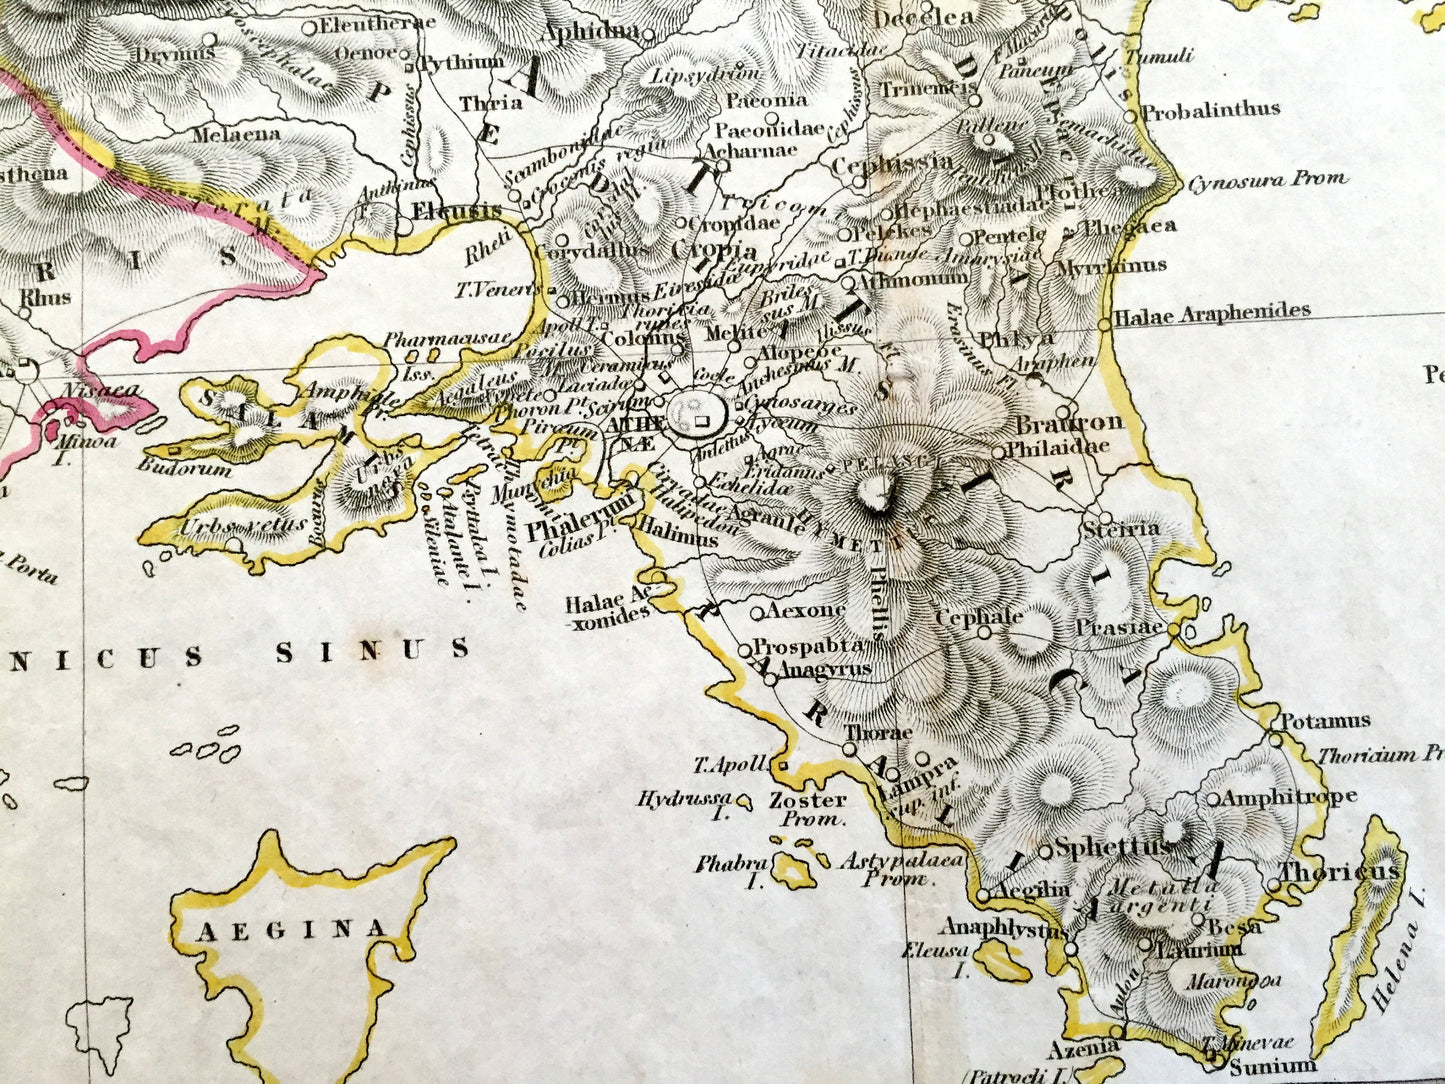 Antique 1830 Ancient Greece Map by J&C Walker, John Murray and Karl Otfried MÜLLER – Athens, Corinth, Ionian Islands, Macedonia, Delphi